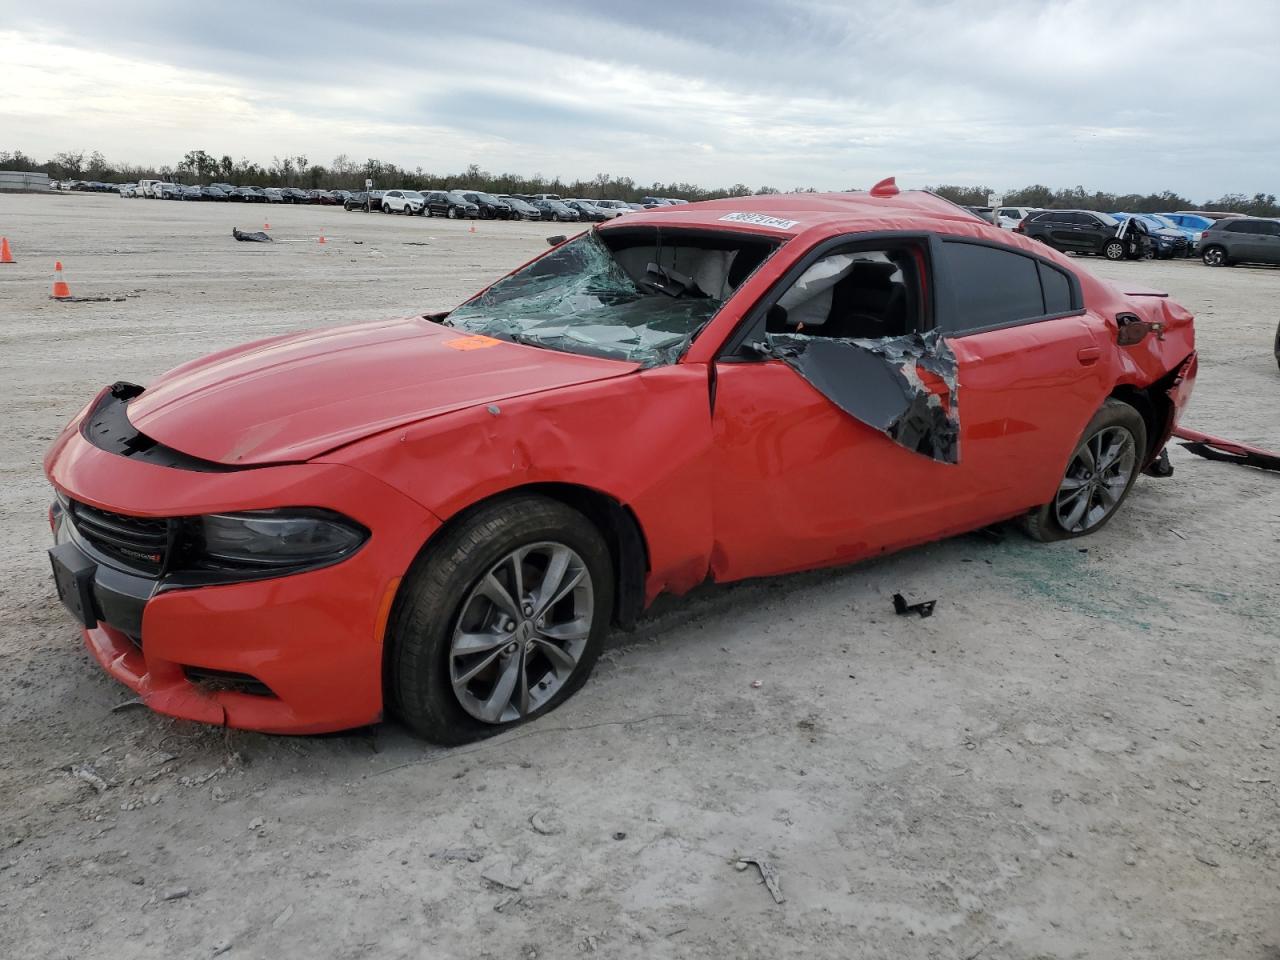 vin: 2C3CDXJG3MH505980 2C3CDXJG3MH505980 2021 dodge charger 3600 for Sale in 34269, Fl - Punta Gorda South, Arcadia, USA